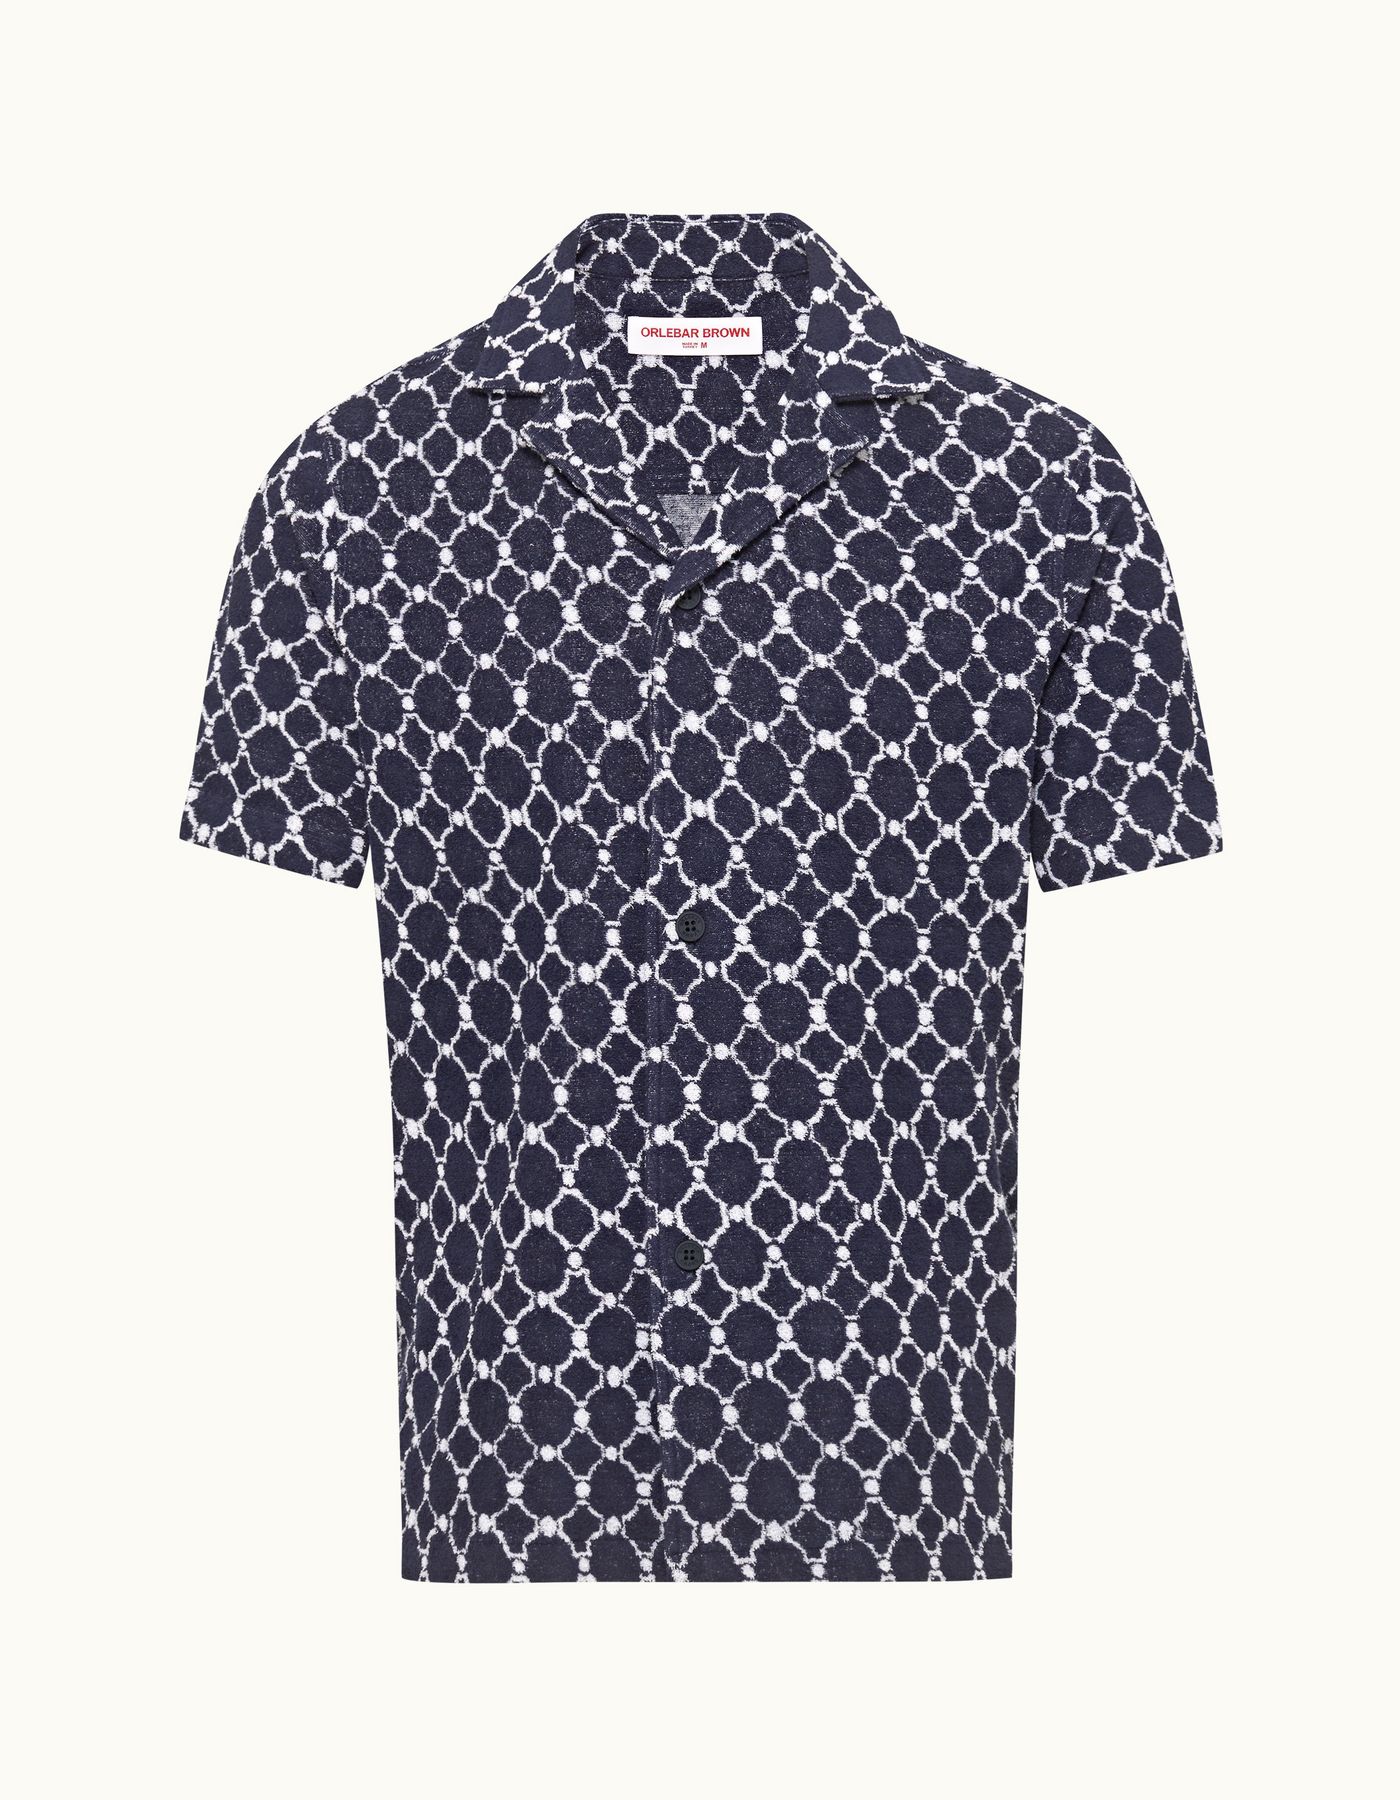 Howell Towelling - Mens Midnight Navy Geometric Tile Relaxed Fit Towelling Shirt